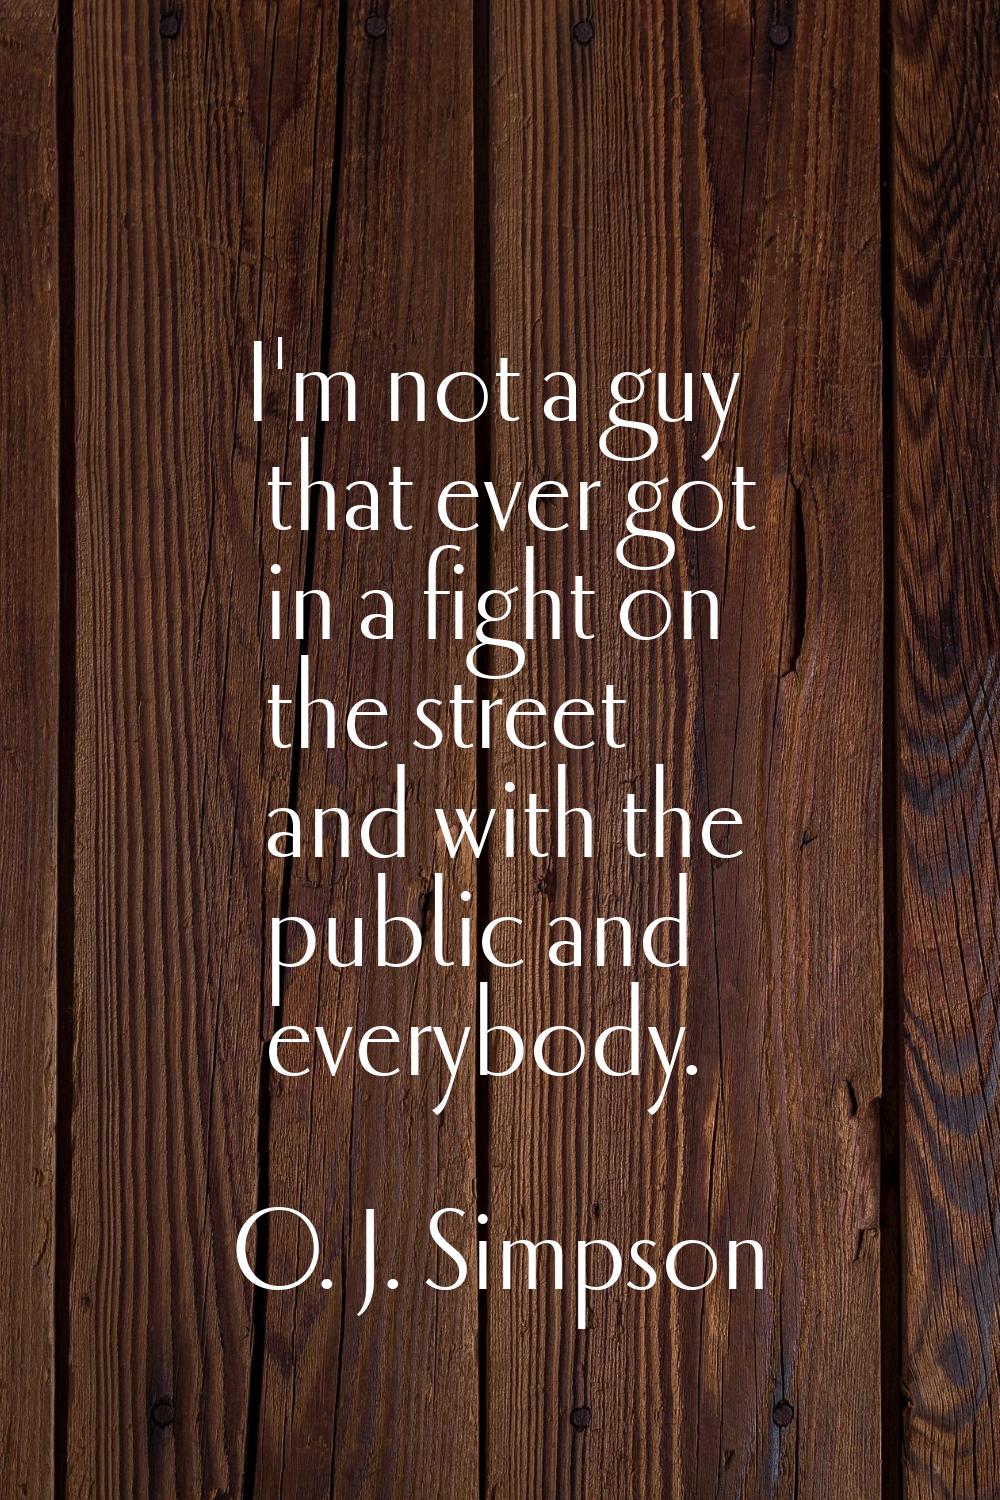 I'm not a guy that ever got in a fight on the street and with the public and everybody.